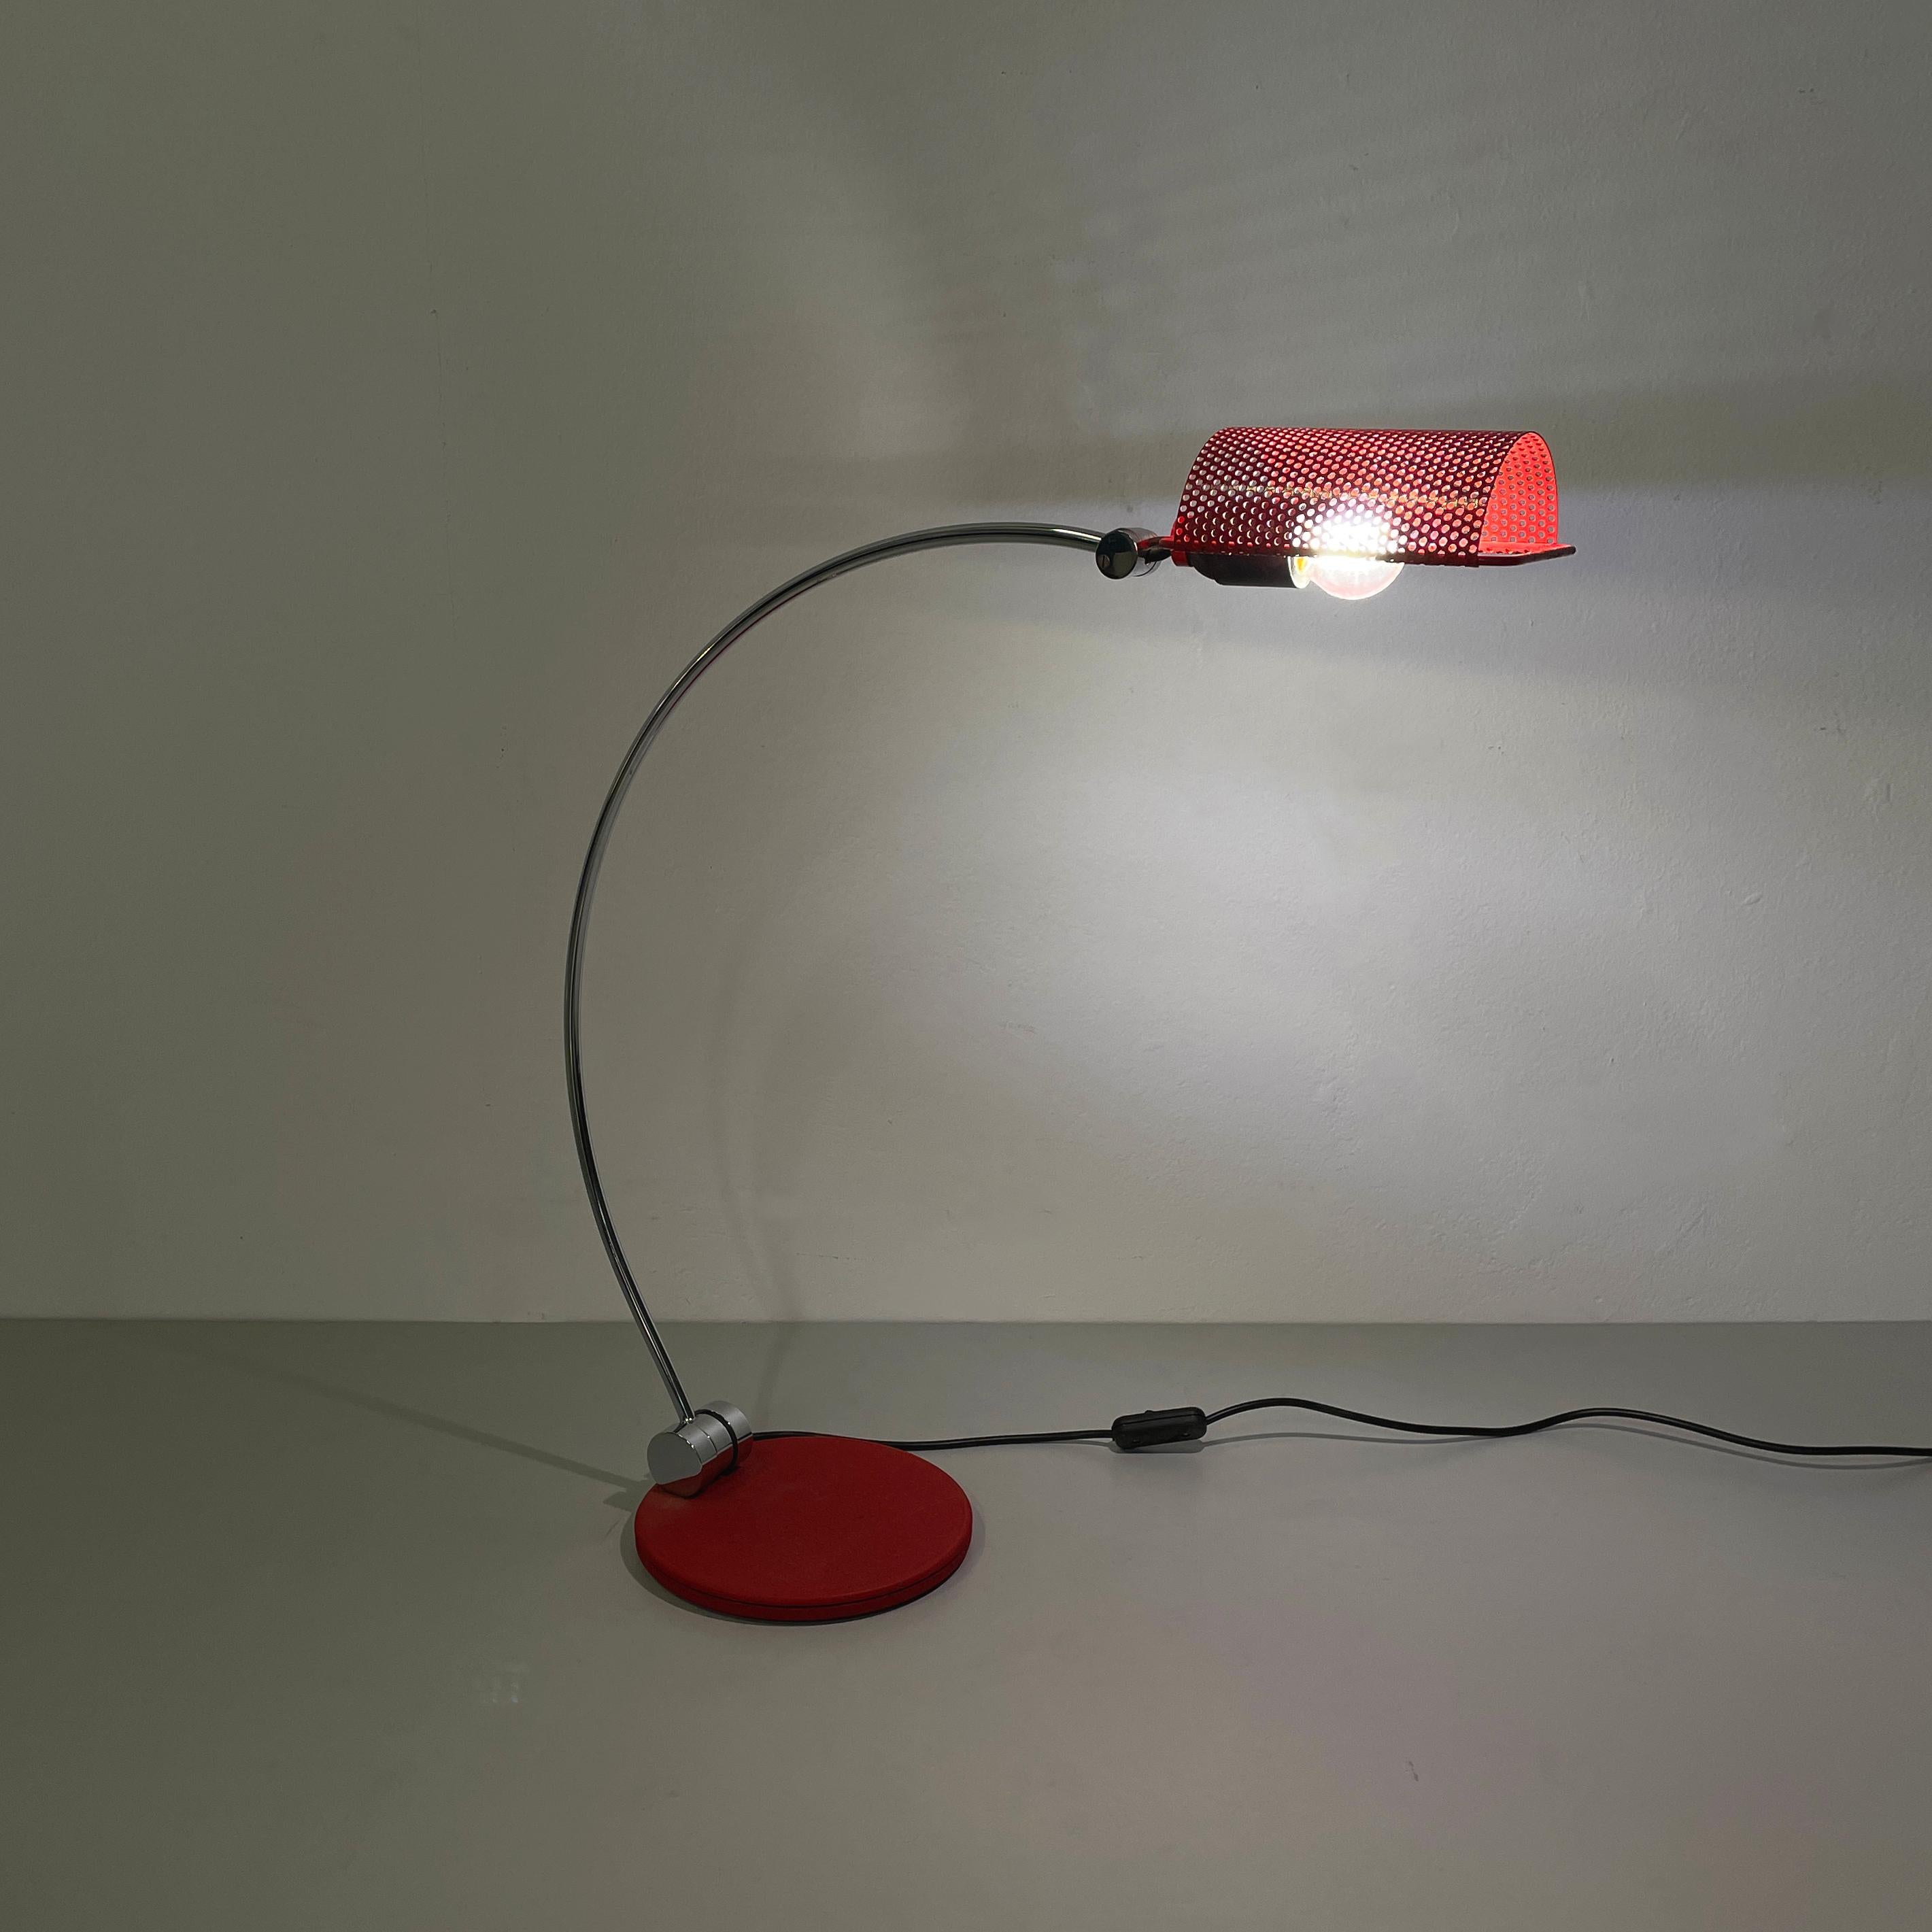 Italian modern Adjustable table lamp in red metal  sheet and steel rod, 1980s
Table lamp with round base in red painted metal. The diffuser is made of a curved and perforated sheet of red painted metal. The steel rod structure allows, through a pin